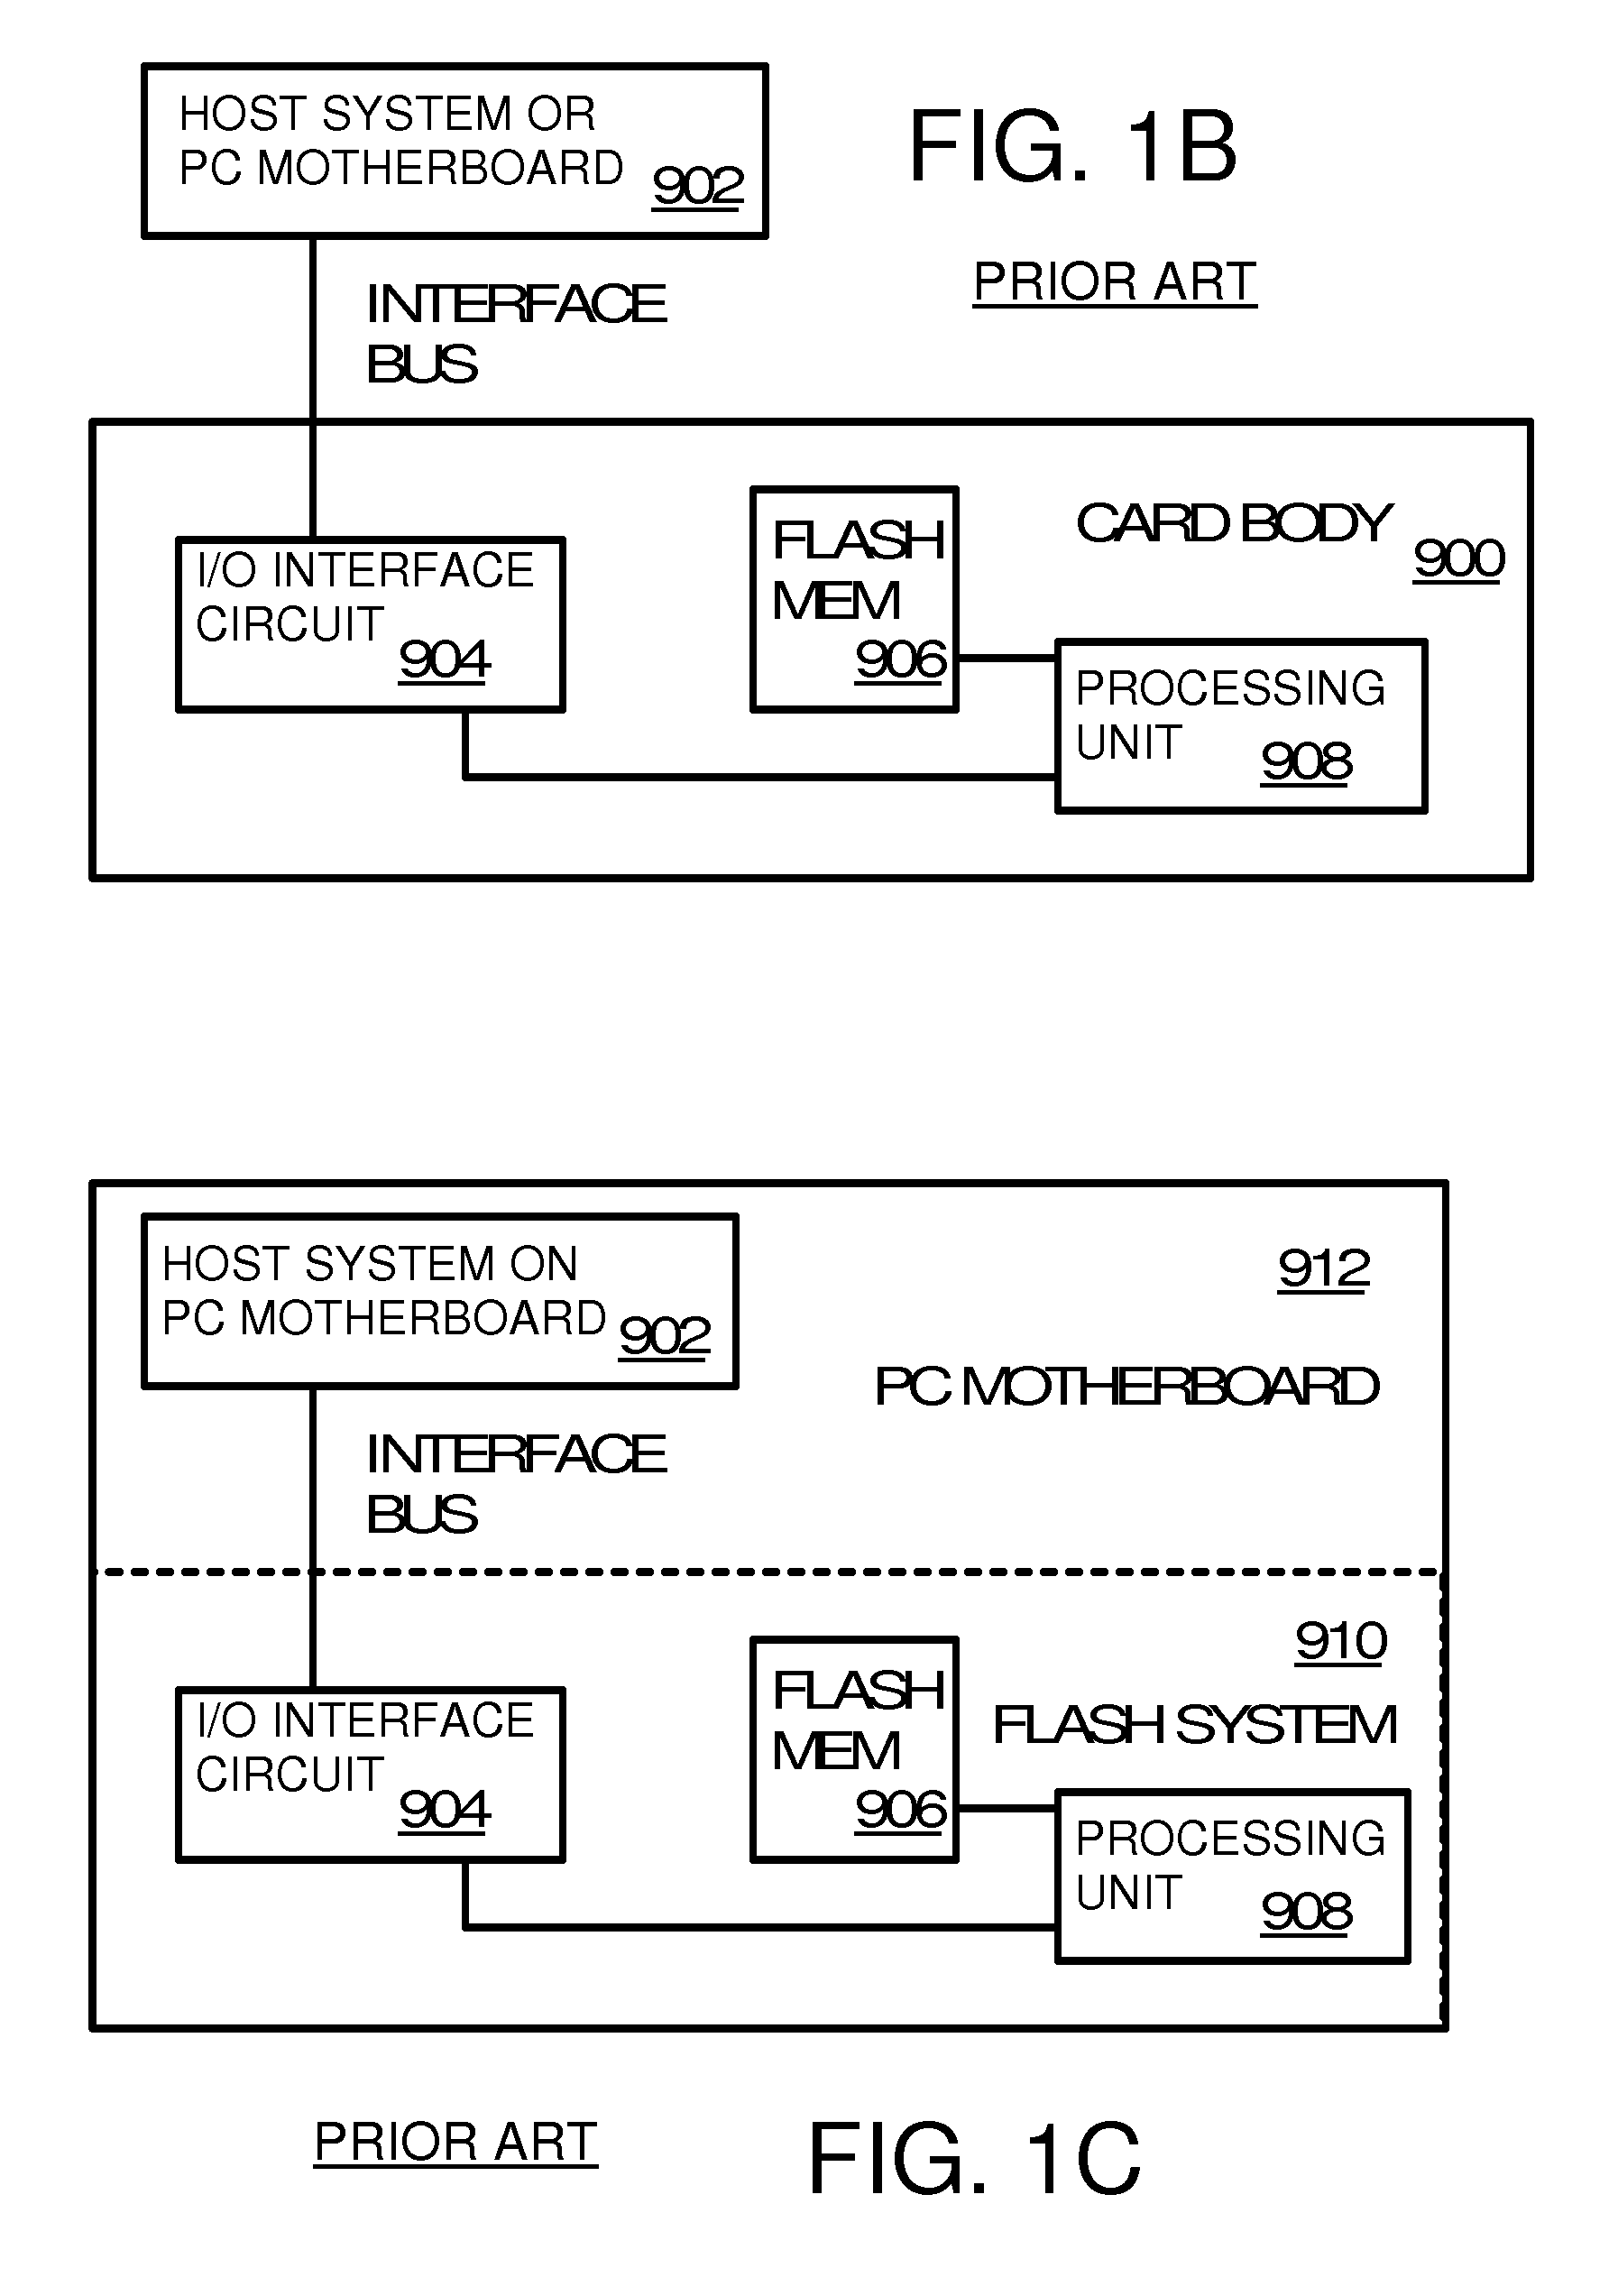 Intelligent solid-state non-volatile memory device (NVMD) system with multi-level caching of multiple channels